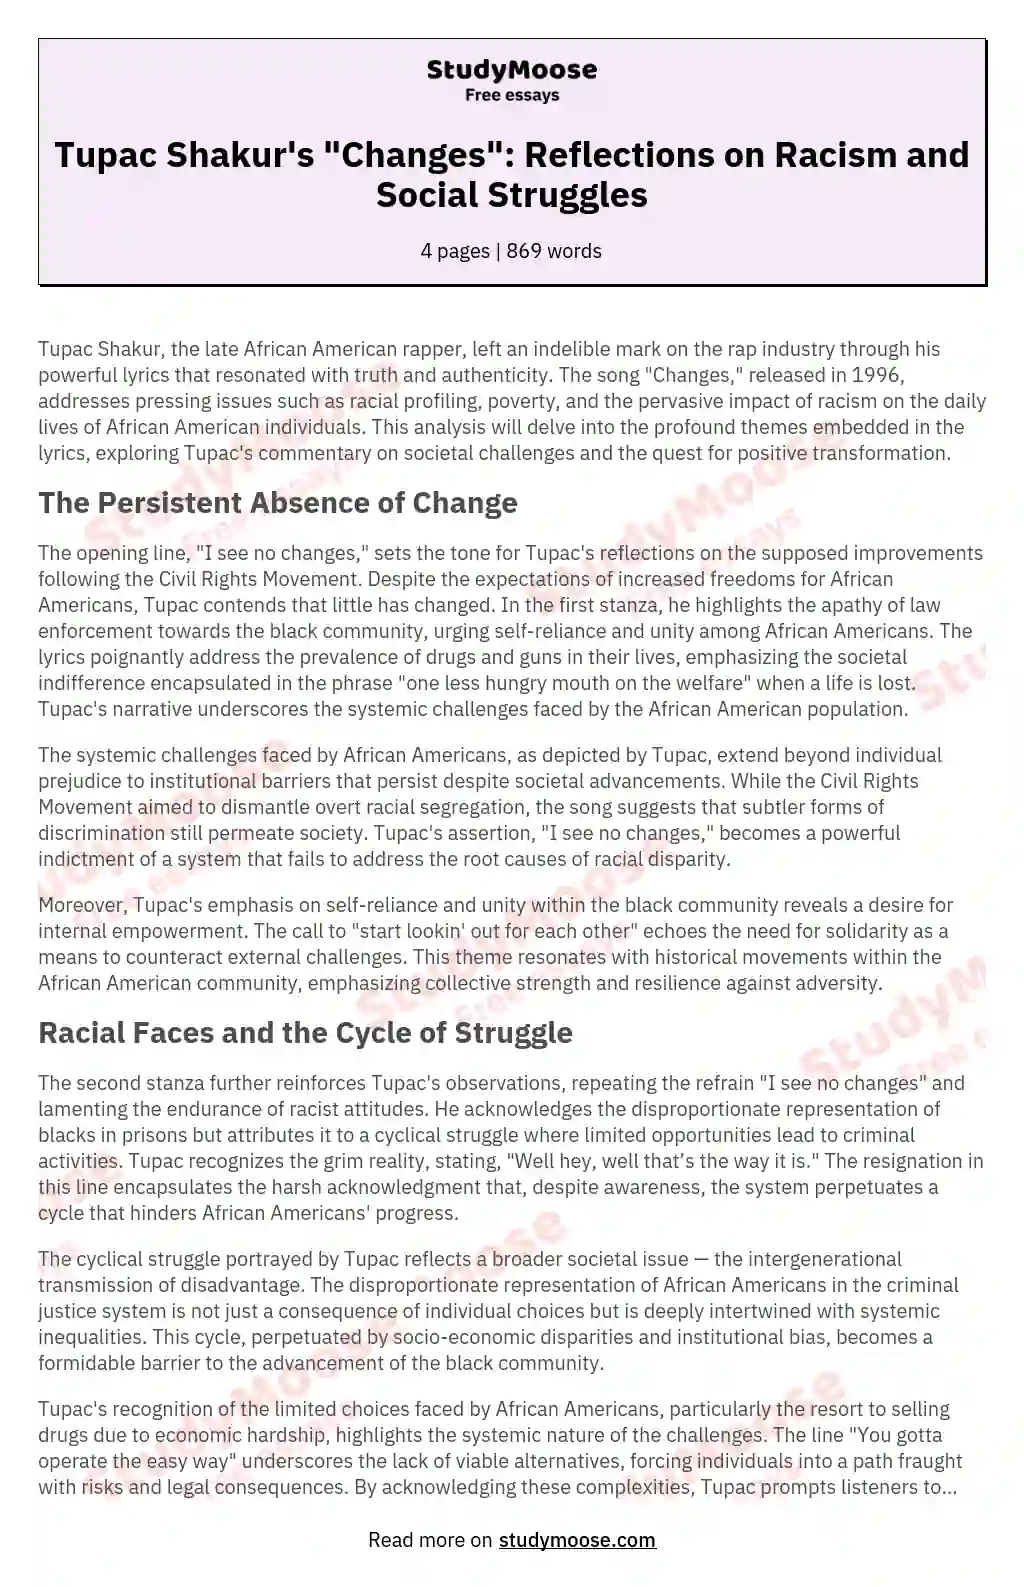 Tupac Shakur's "Changes": Reflections on Racism and Social Struggles essay